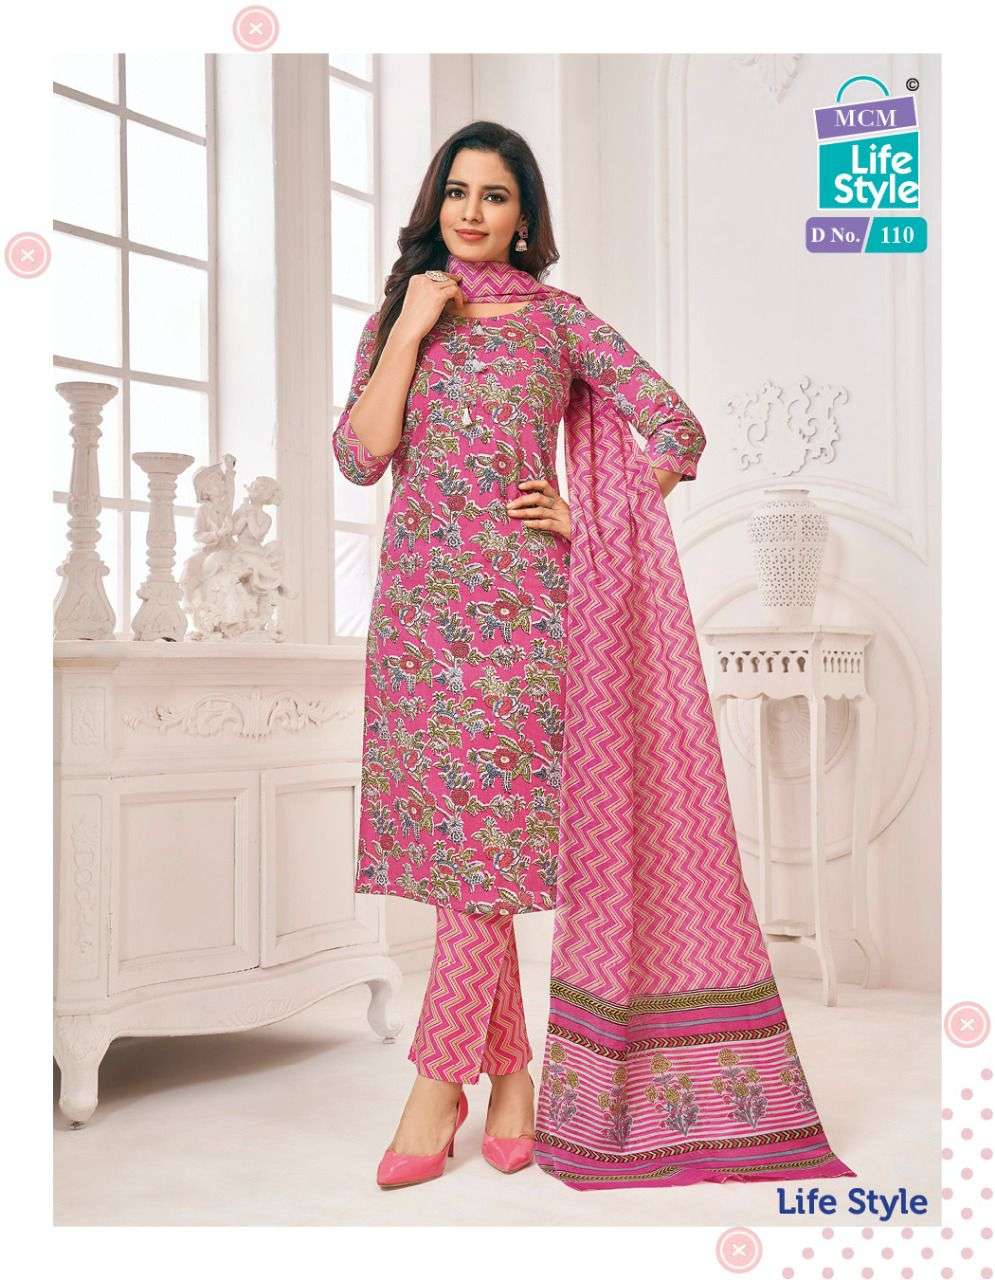 LIFE STYLE BY MCM LIFESTYLE 108 TO 119 SERIES BEAUTIFUL SUITS COLORFUL STYLISH FANCY CASUAL WEAR & ETHNIC WEAR FANCY PRINT DRESSES AT WHOLESALE PRICE